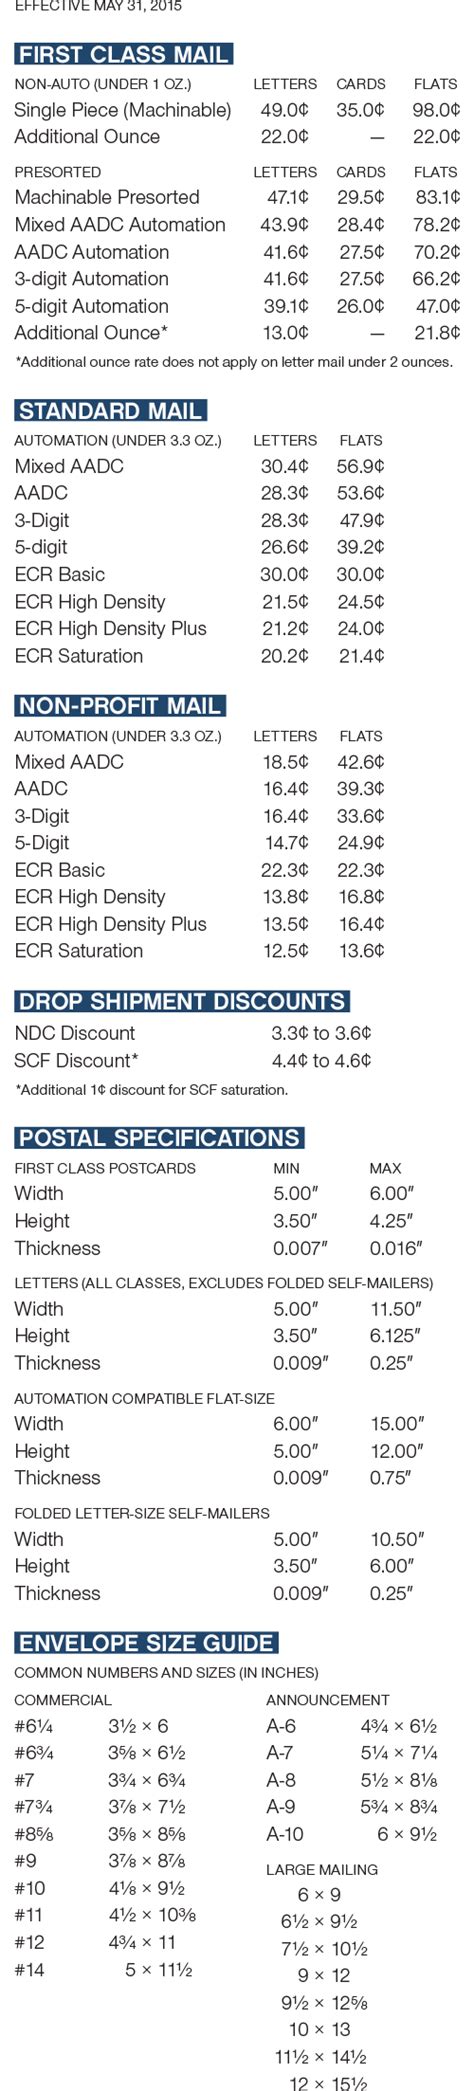 Postage Rate Chart